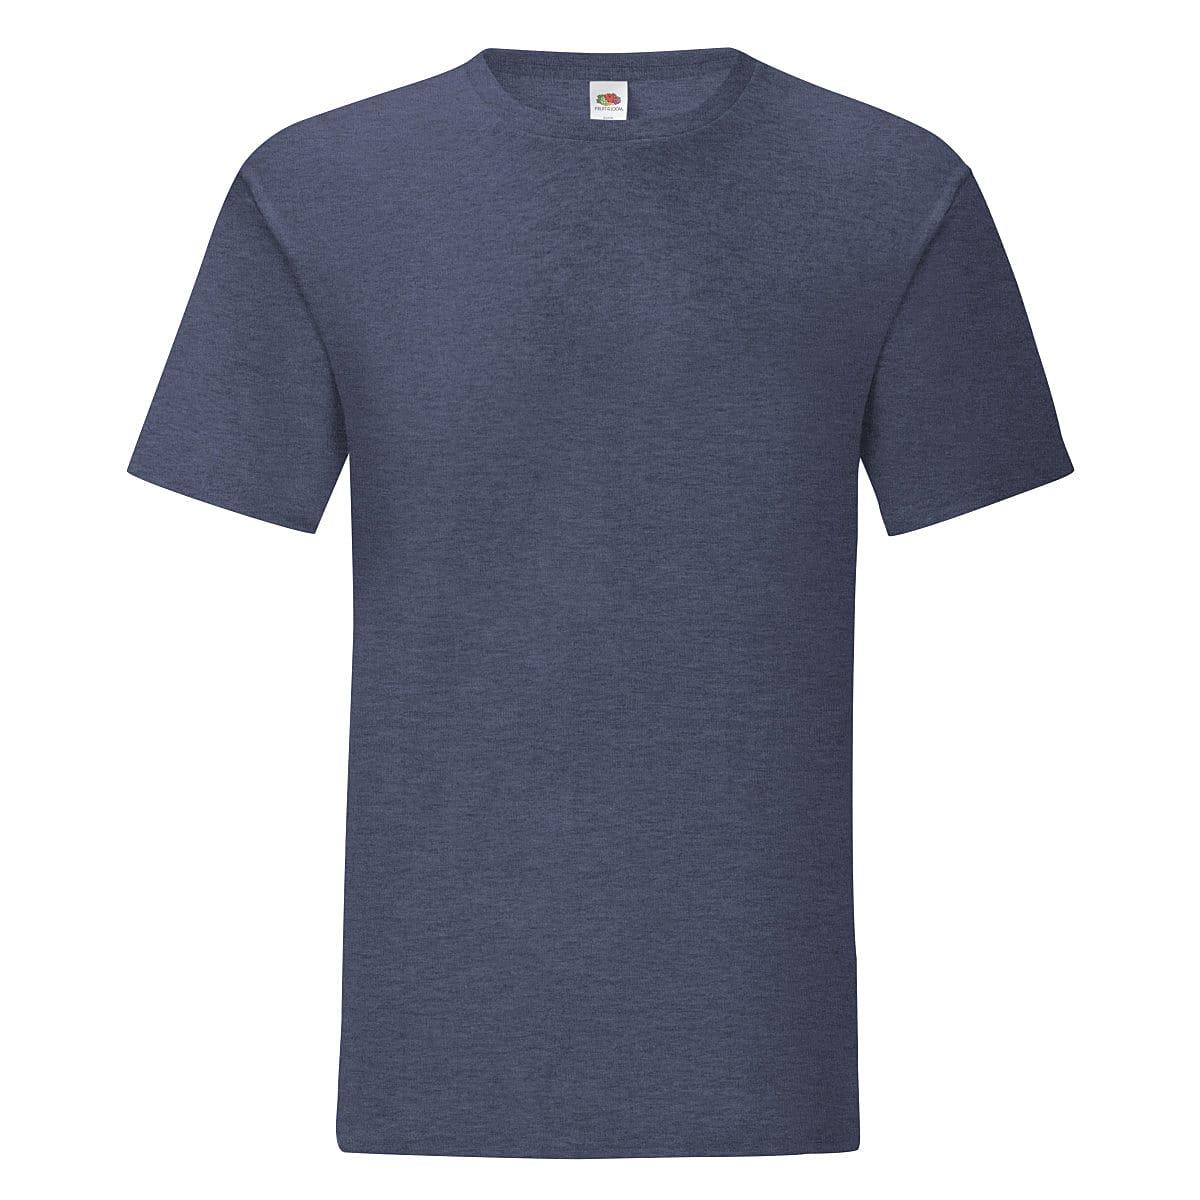 Fruit Of The Loom Mens Iconic T-Shirt in Vintage Heather Navy (Product Code: 61430)